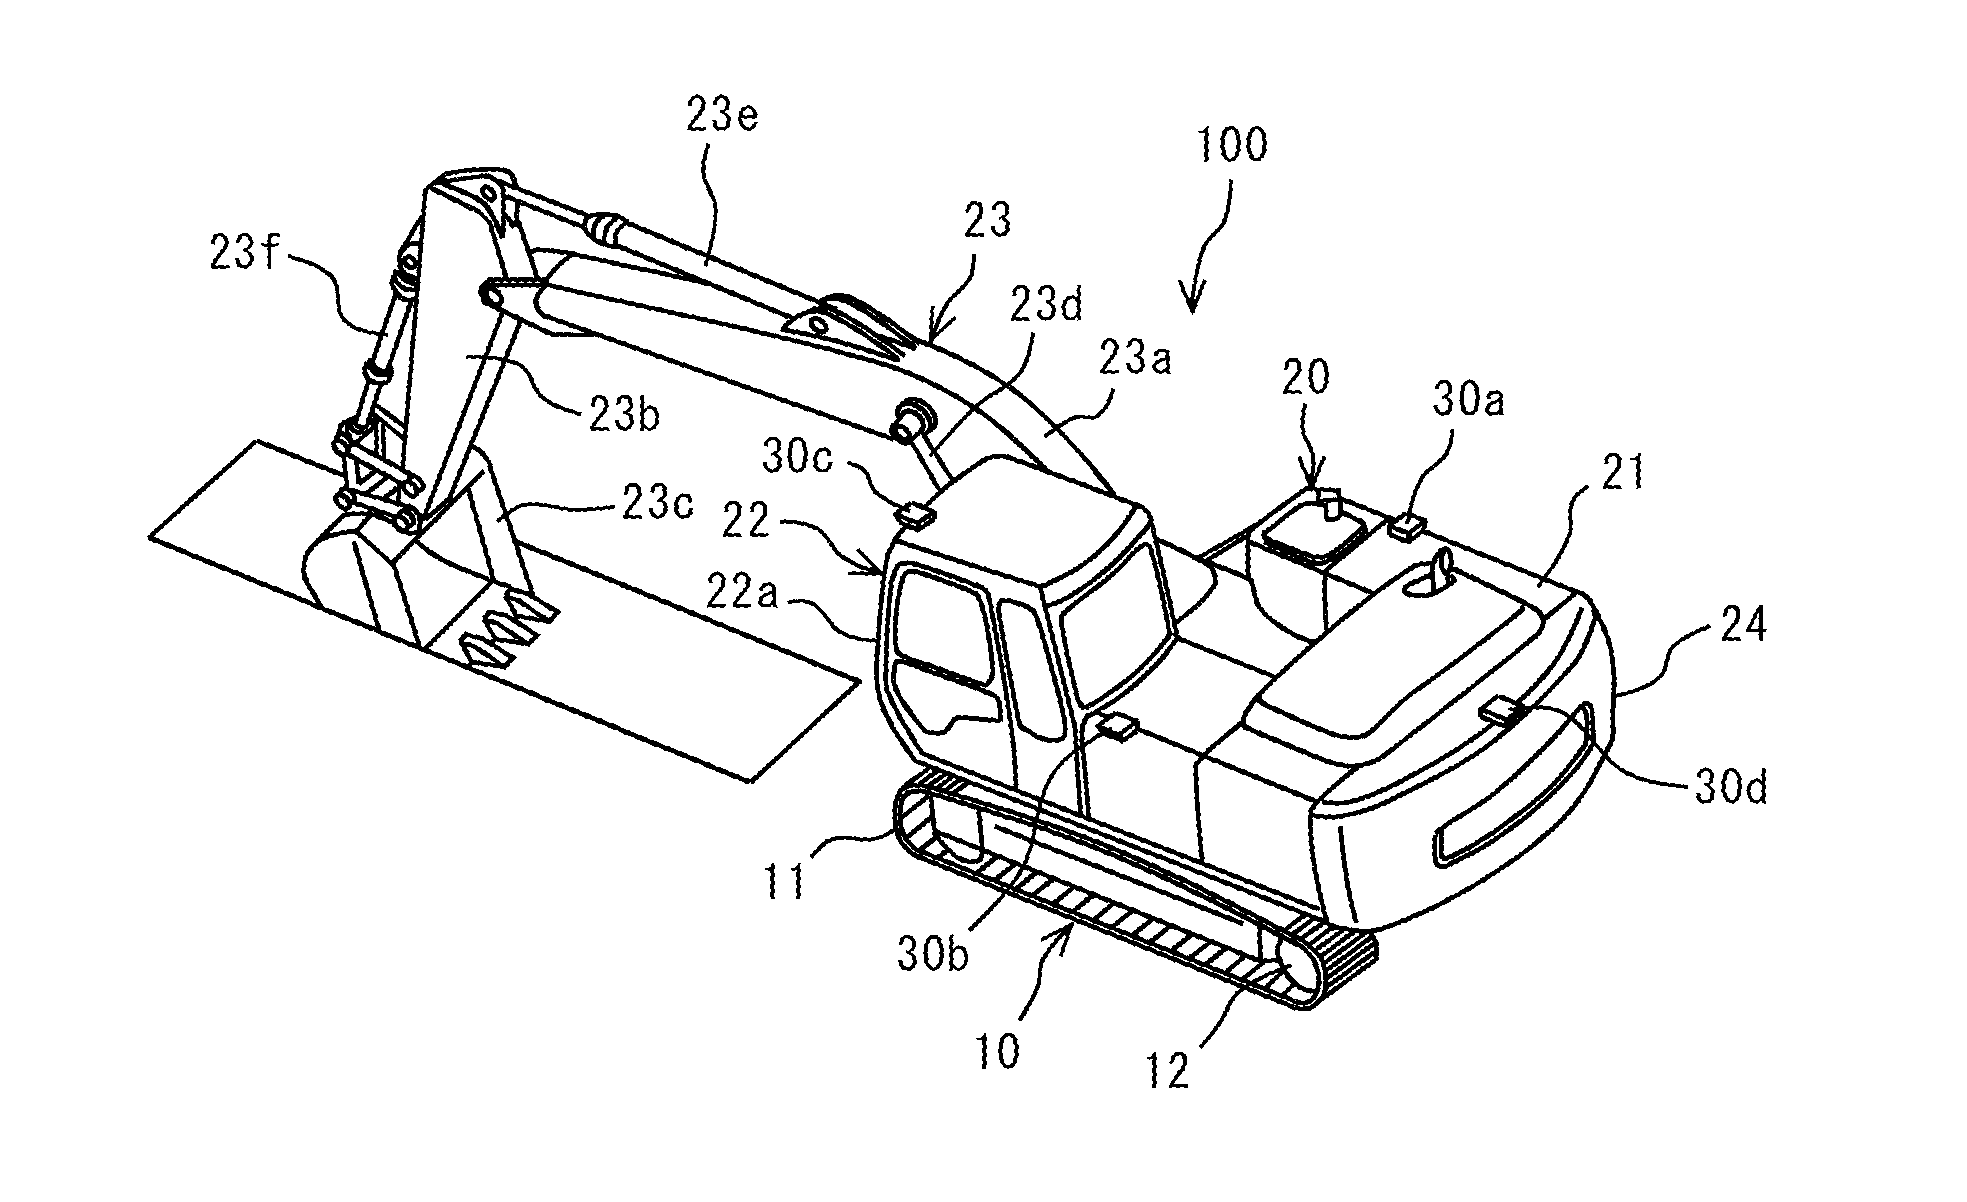 Device for monitoring surroundings of machinery